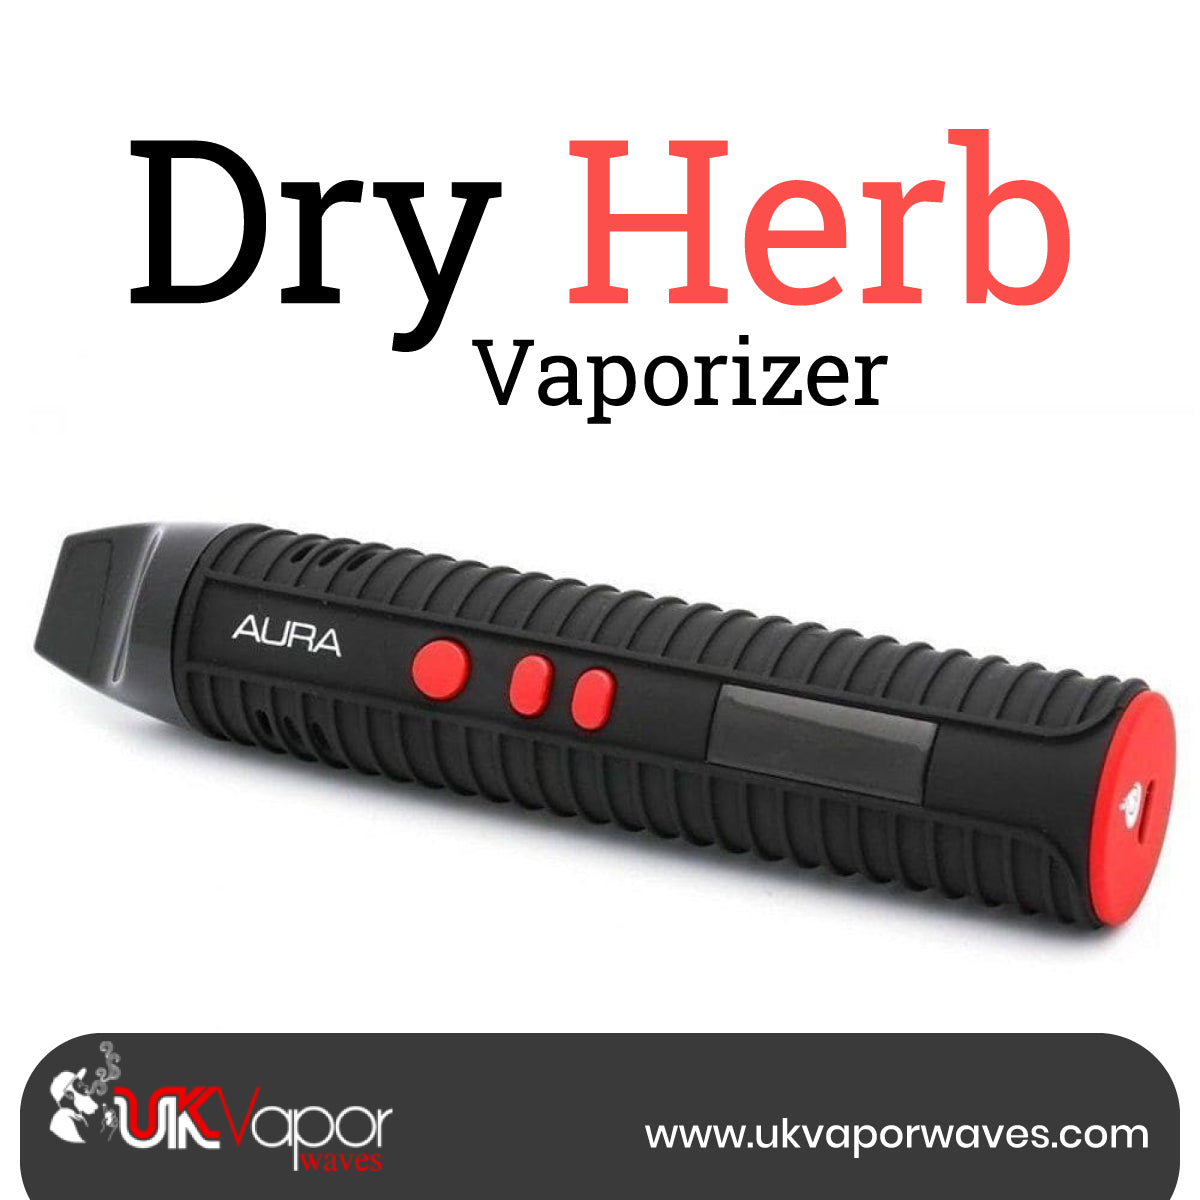 Fancy Dry Herb Vaporizers In To Replace Your Cigarettes